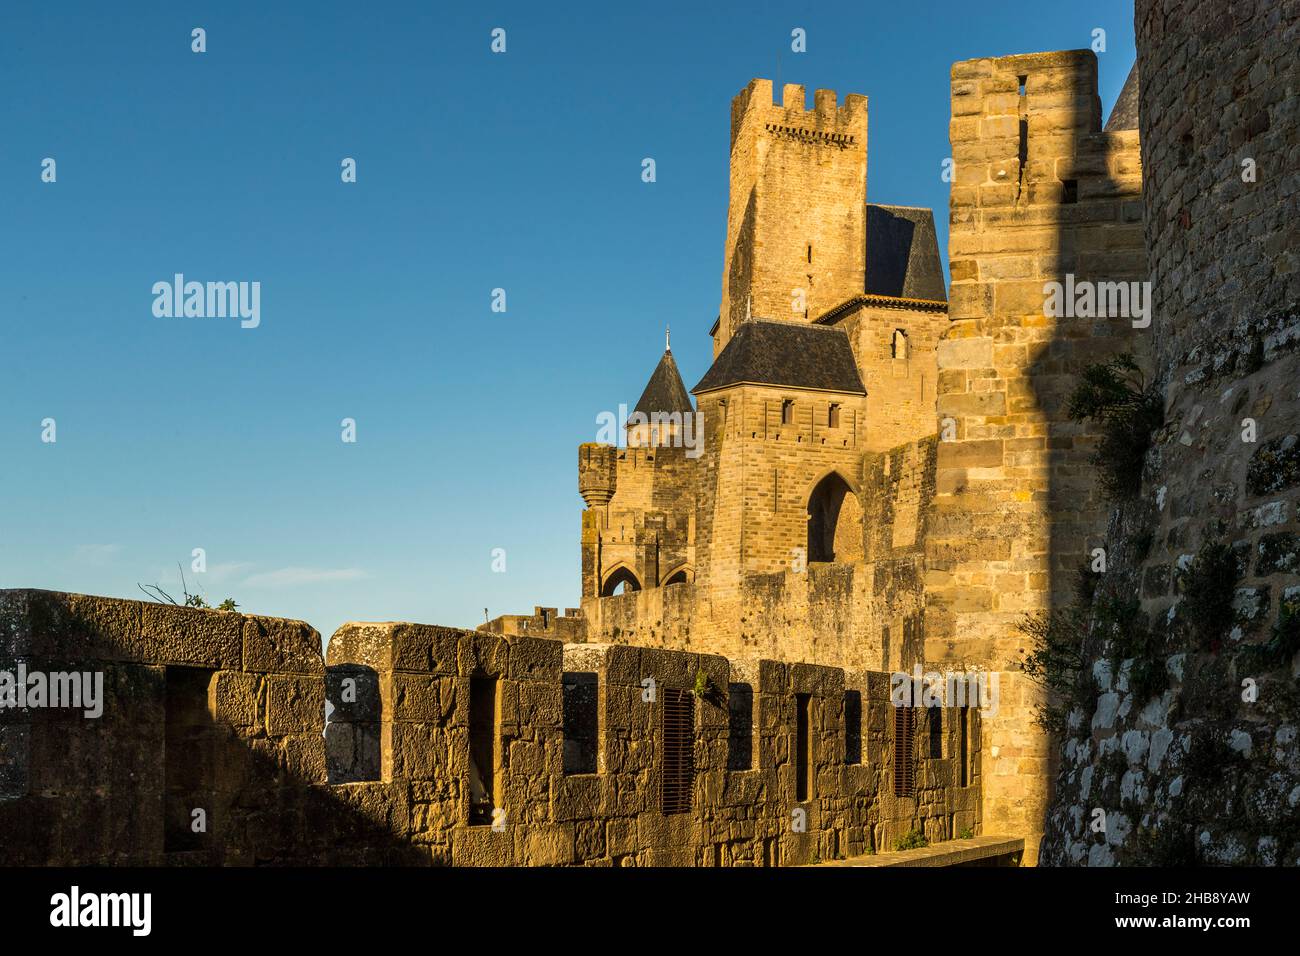 Medieval fortress located on a hill of the old town, called Cité of Carcassonne. Carcassonne, France Stock Photo